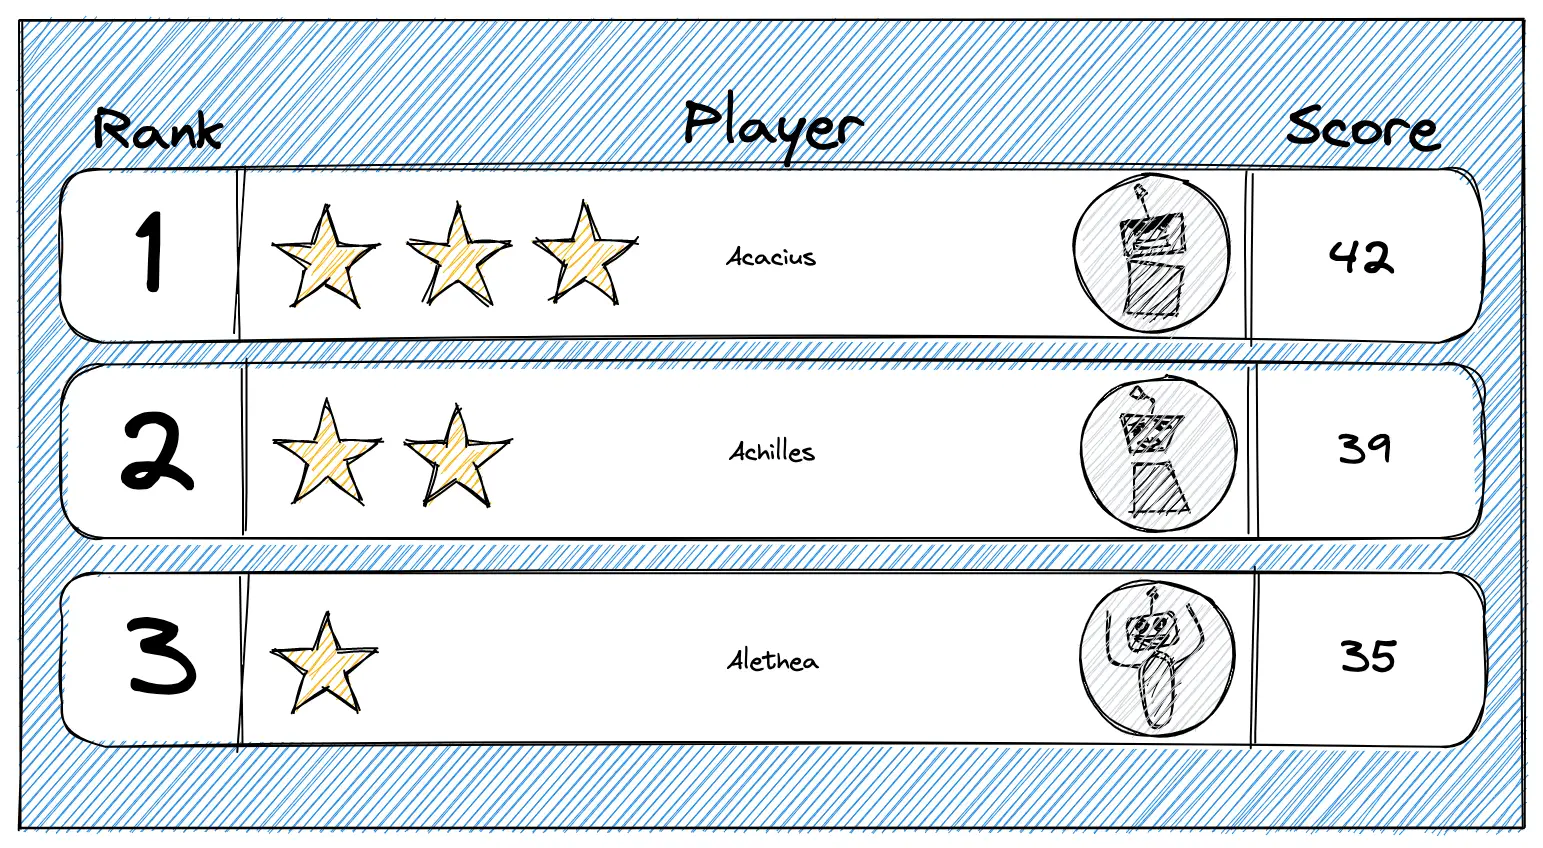 Example of a traditional multiplayer leaderboard.